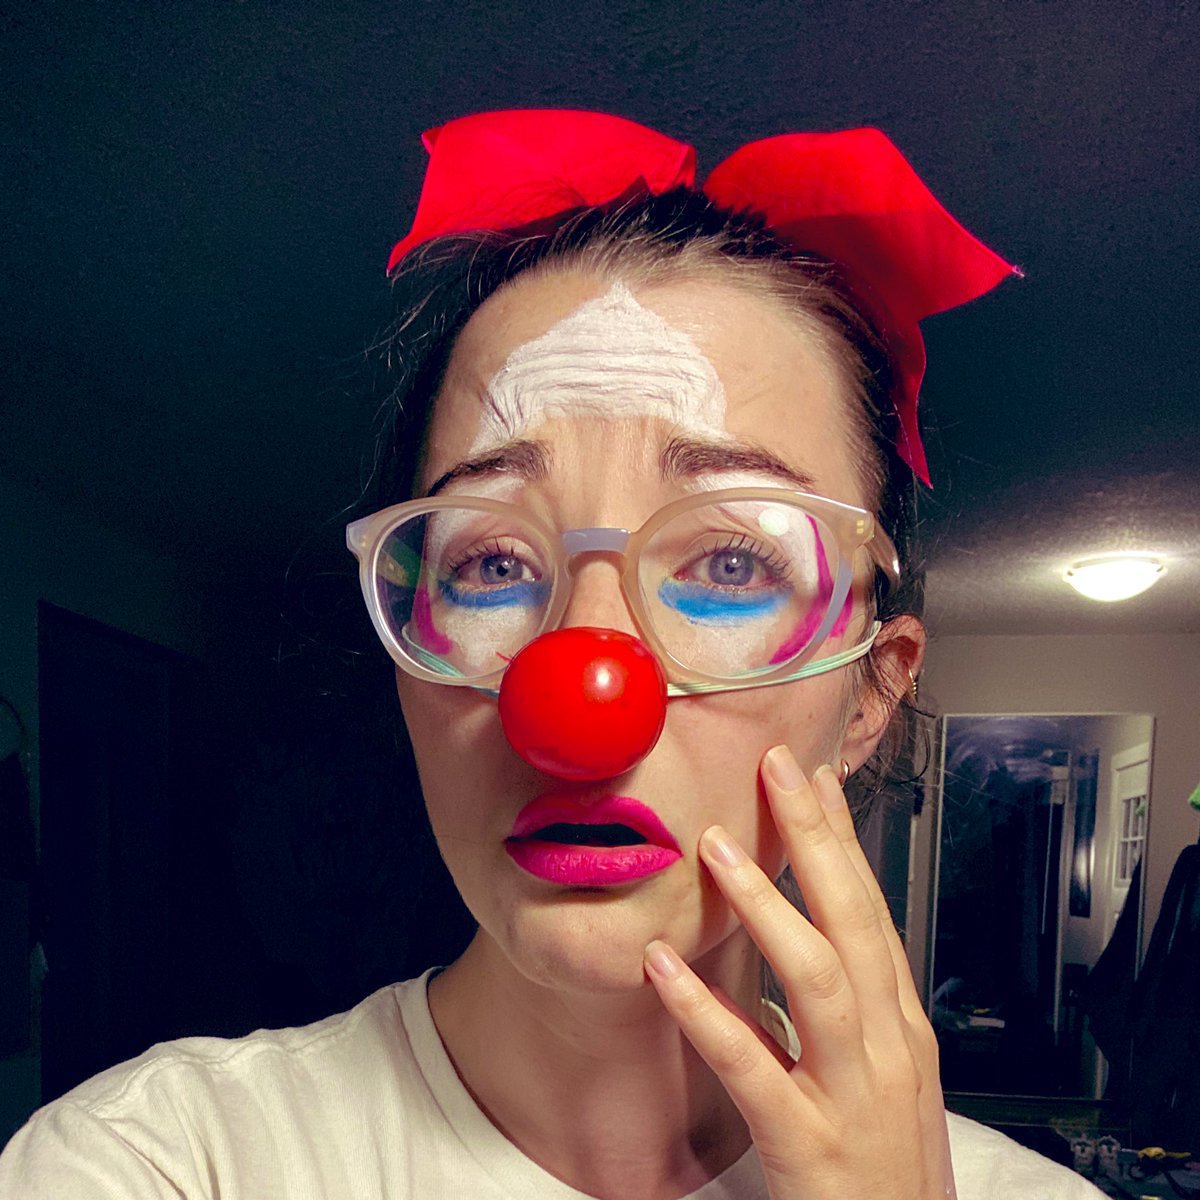 we played the “things I loved to do as a kid” game to get to know each other, then mom talked us into our Fools & we got to experiment w our masks - choosing only a couple key costume items was an amazingly fun task & I made make-up discoveries I’m surprised and DELIGHTED with 